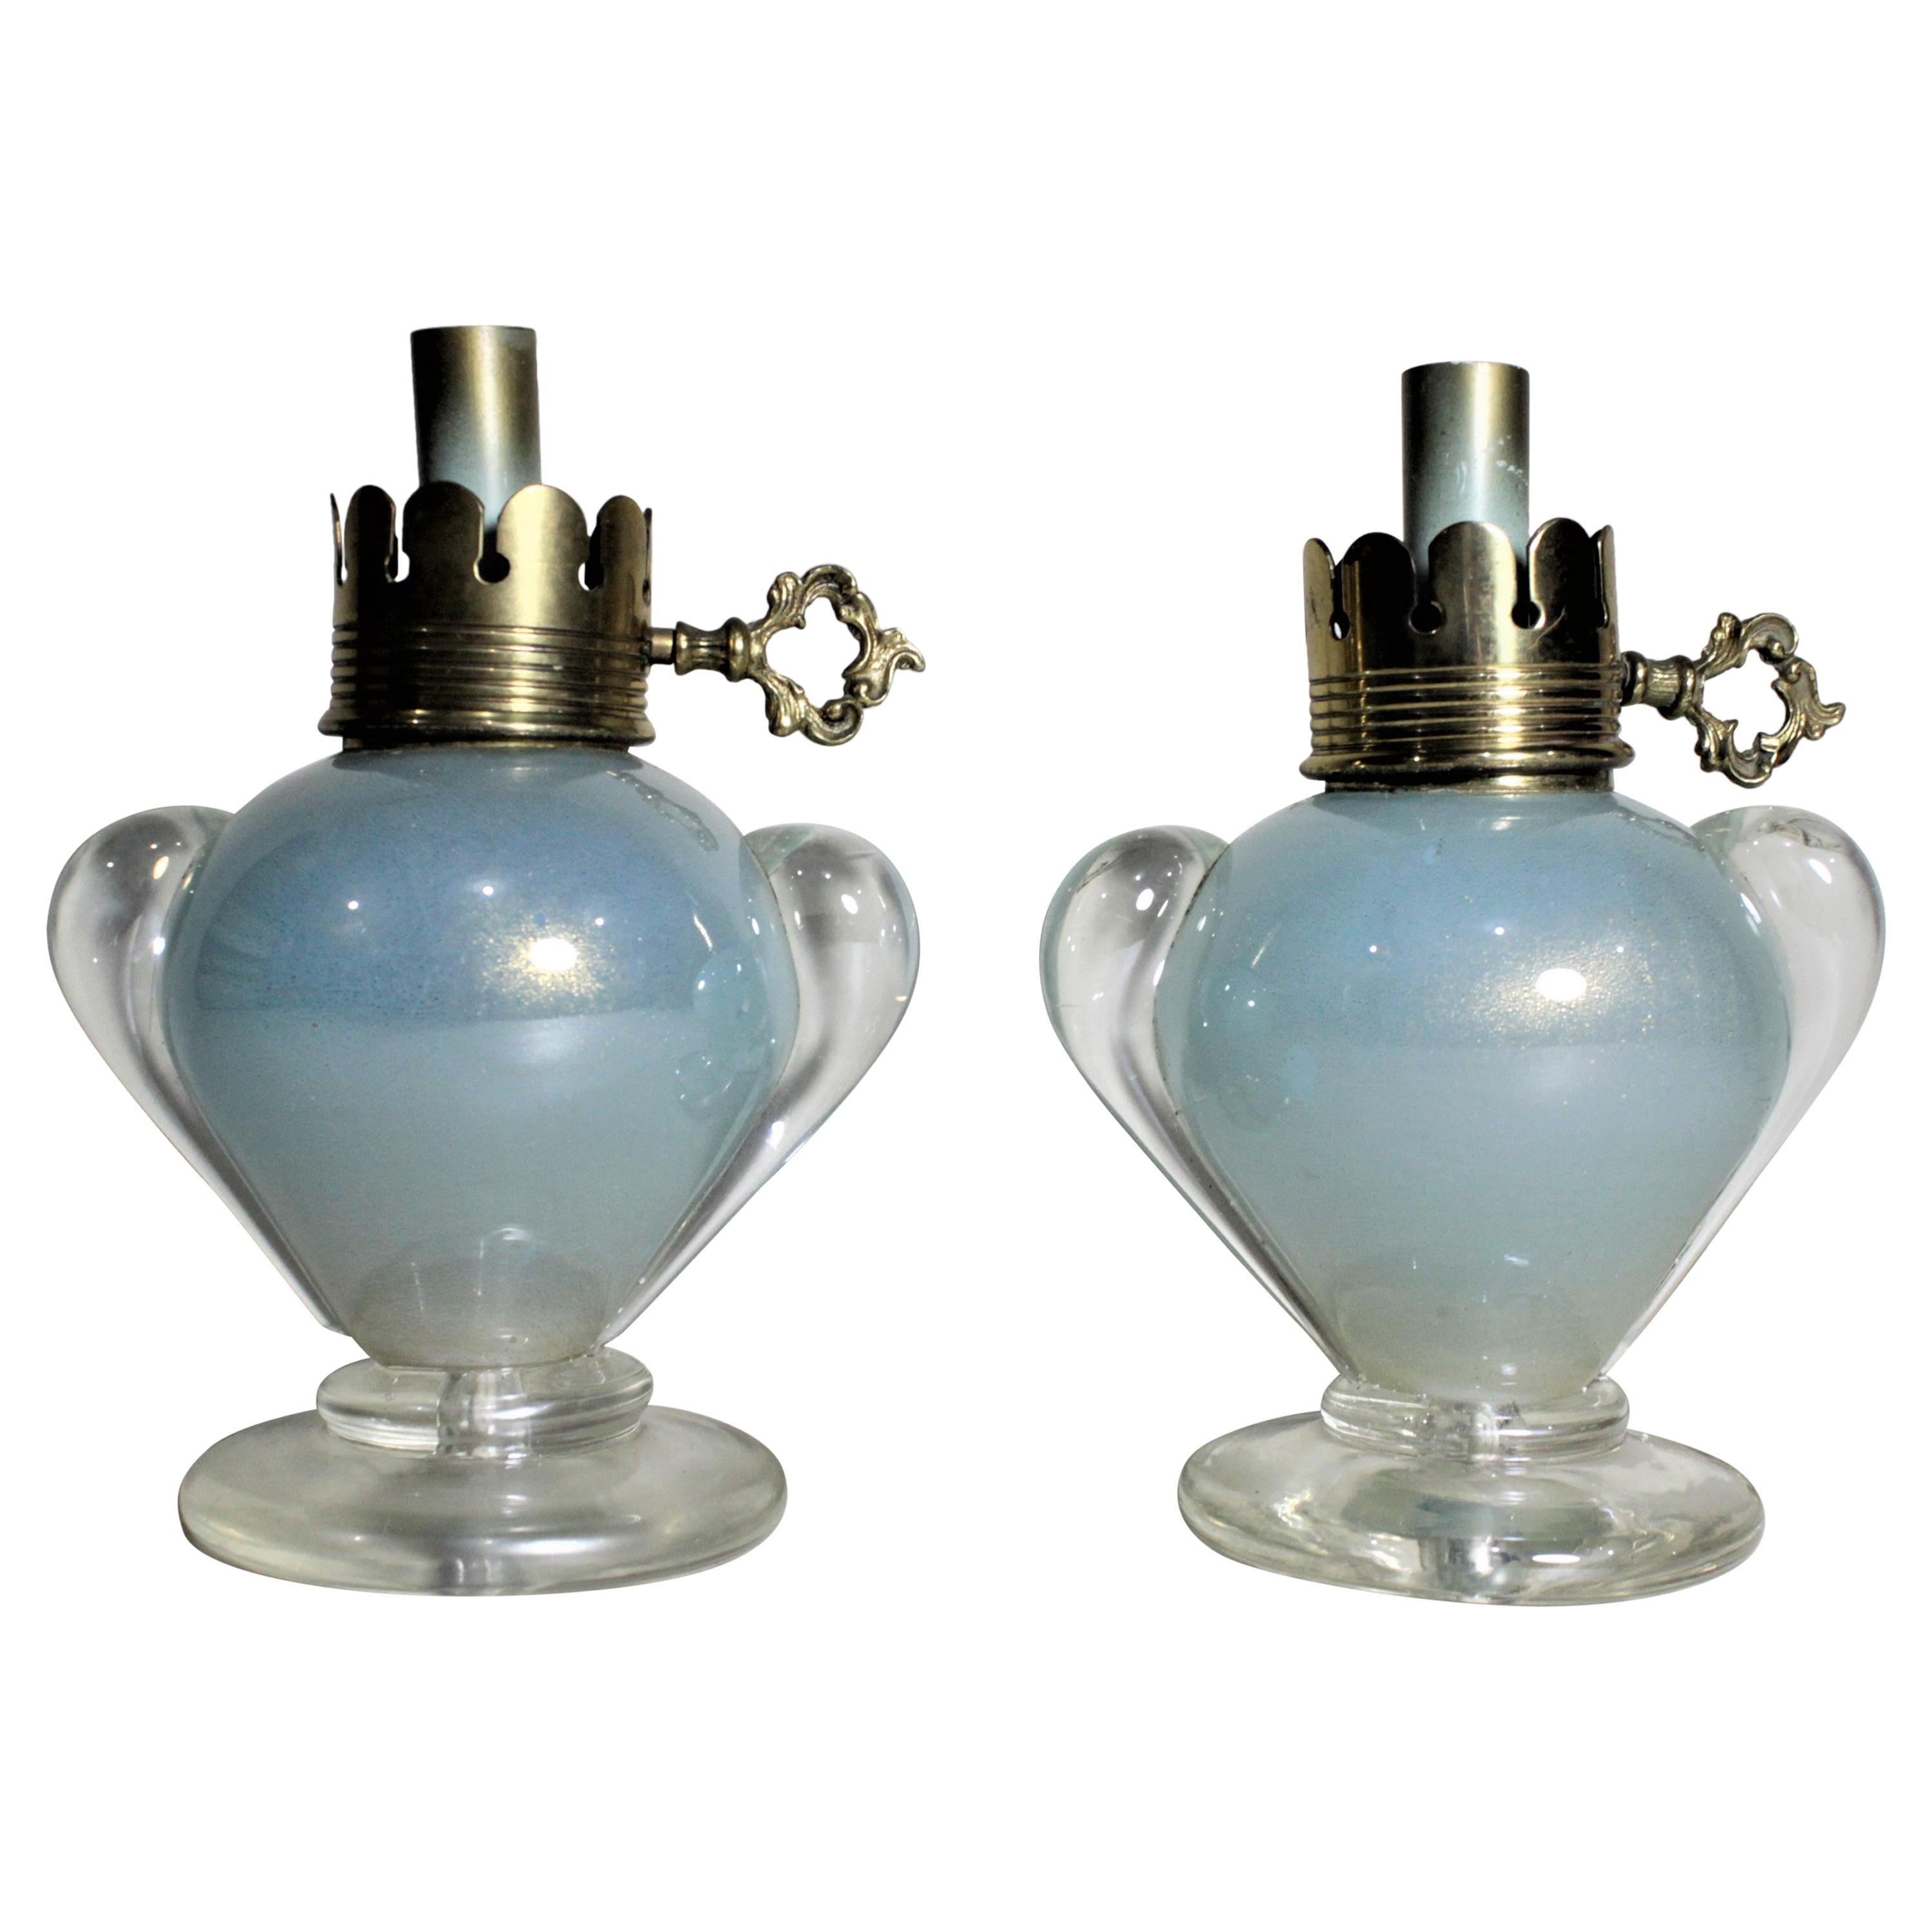 Pair of Vintage Murano Lantern Styled Art Glass Table or Bedroom Accent Lamps